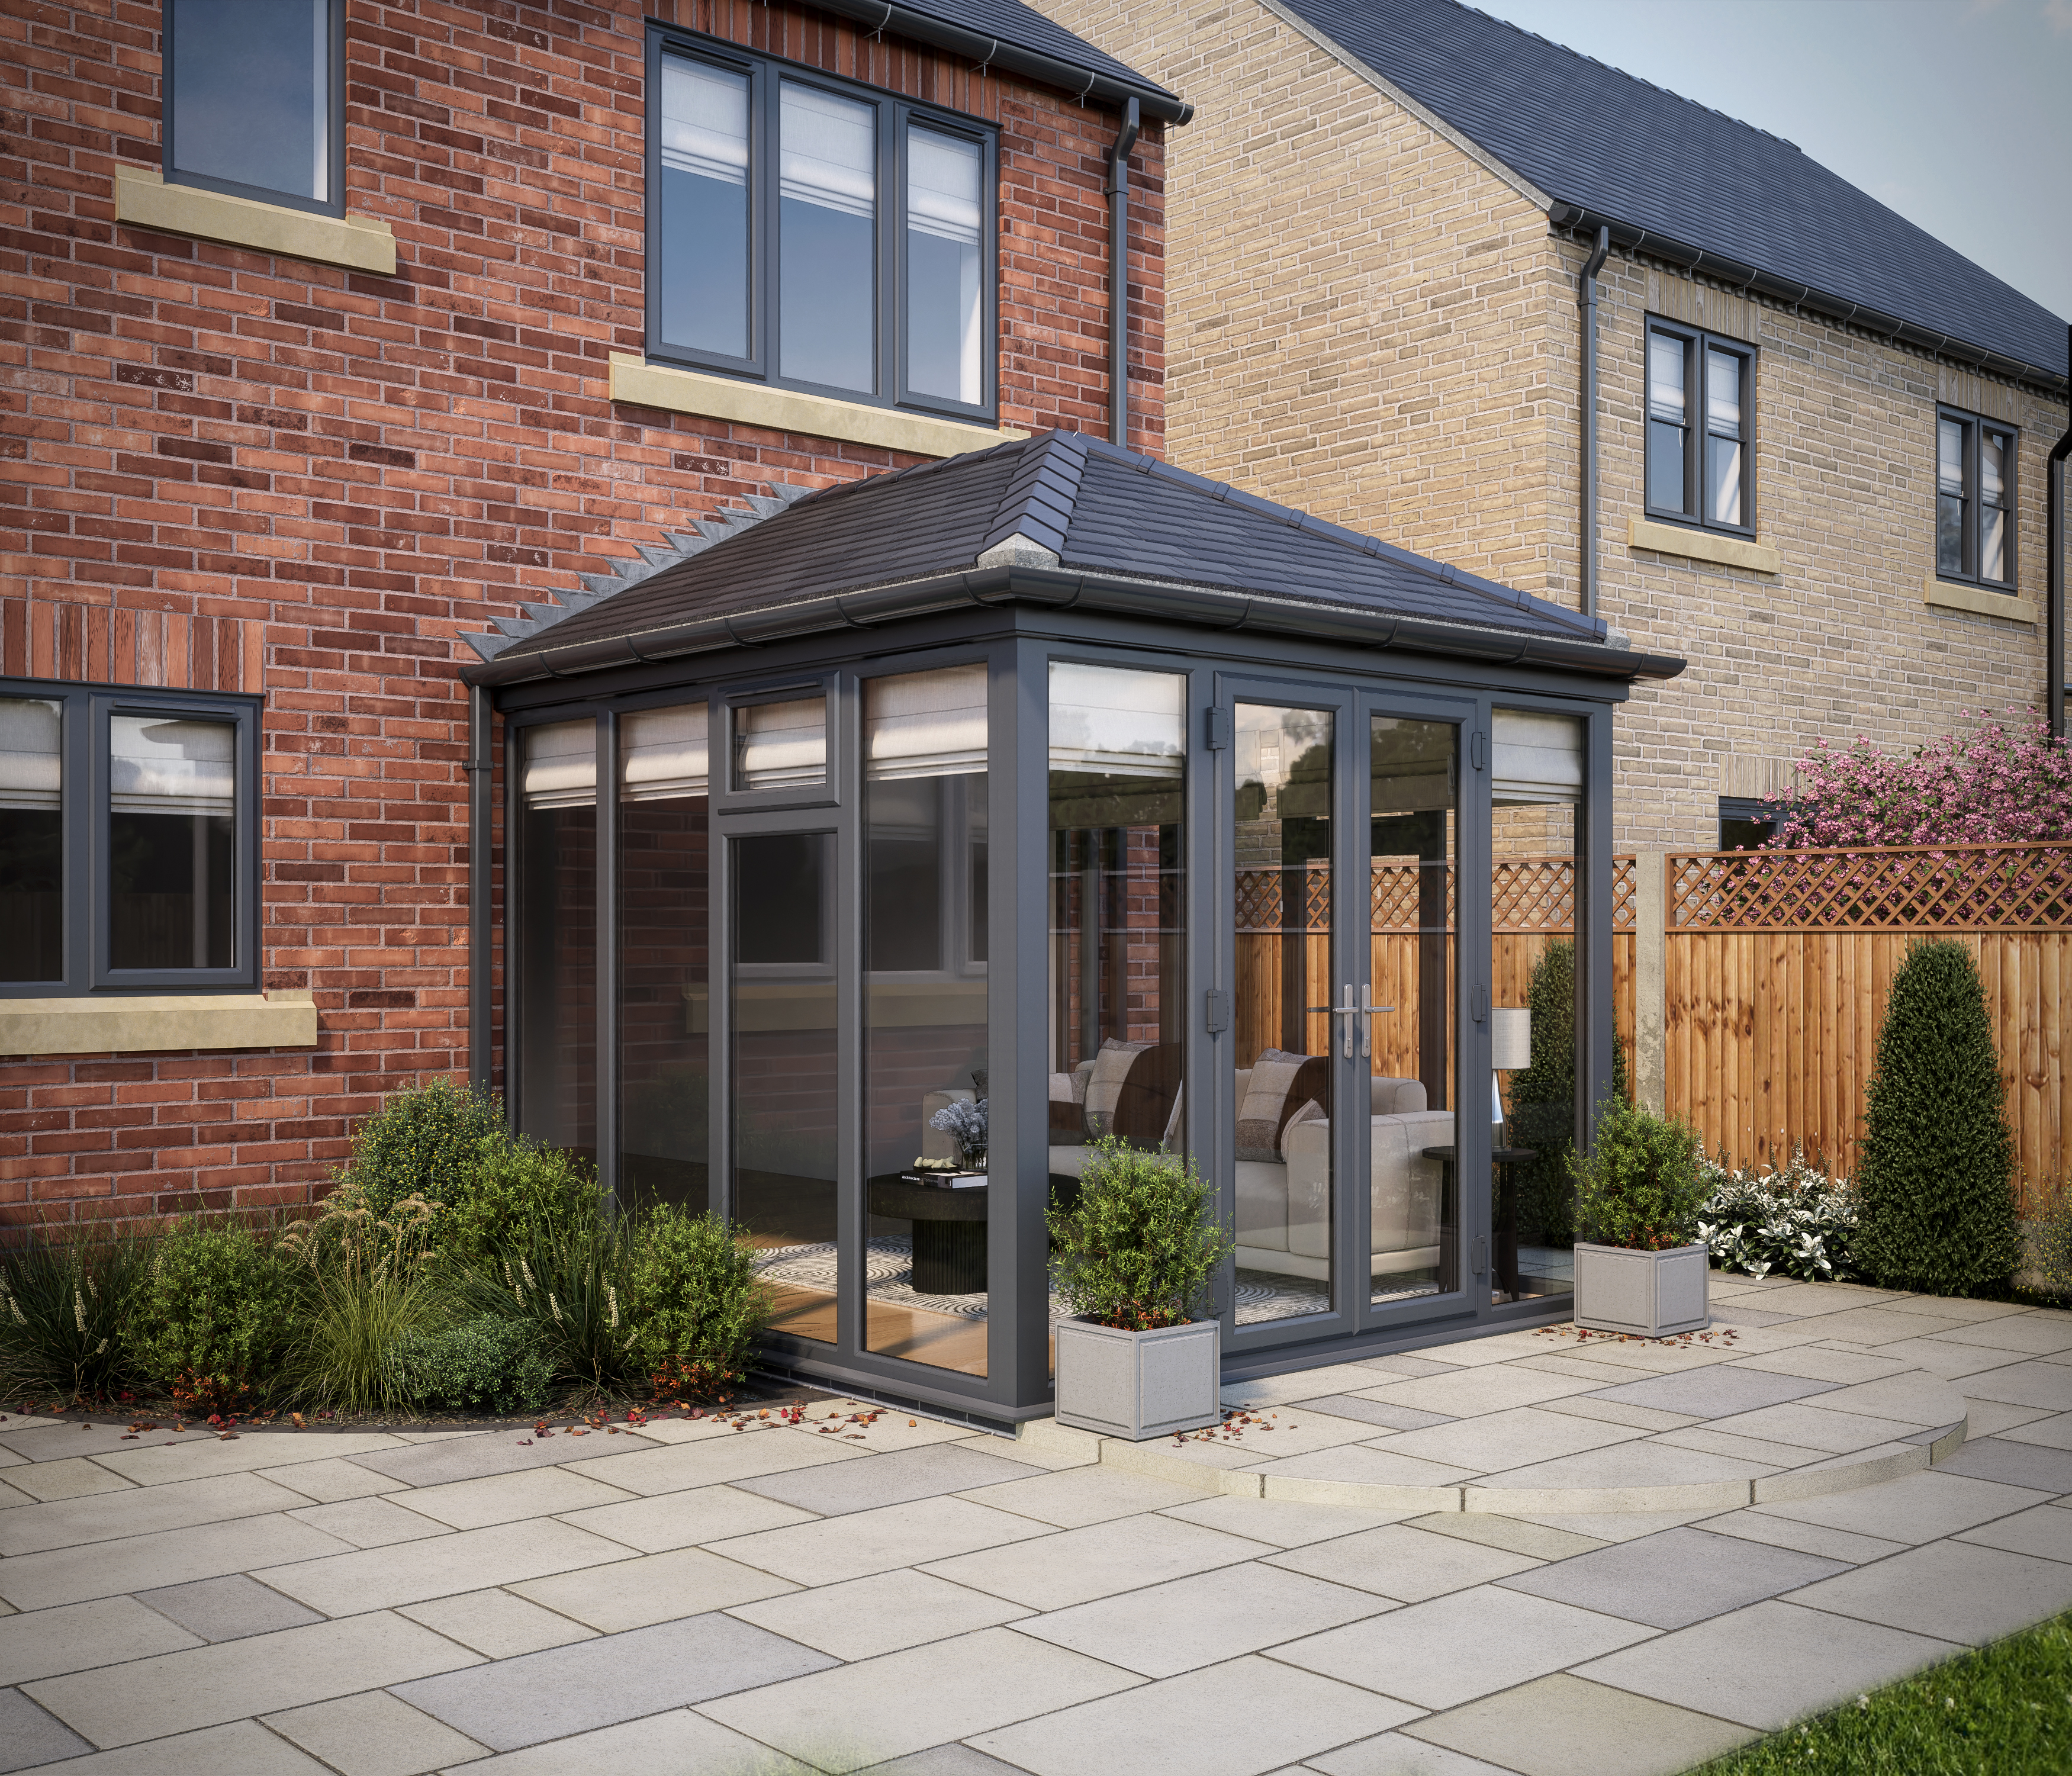 Image of SOLid Roof Full Height Edwardian Conservatory Grey Frames with Titanium Grey Tiles - 10 x 10ft